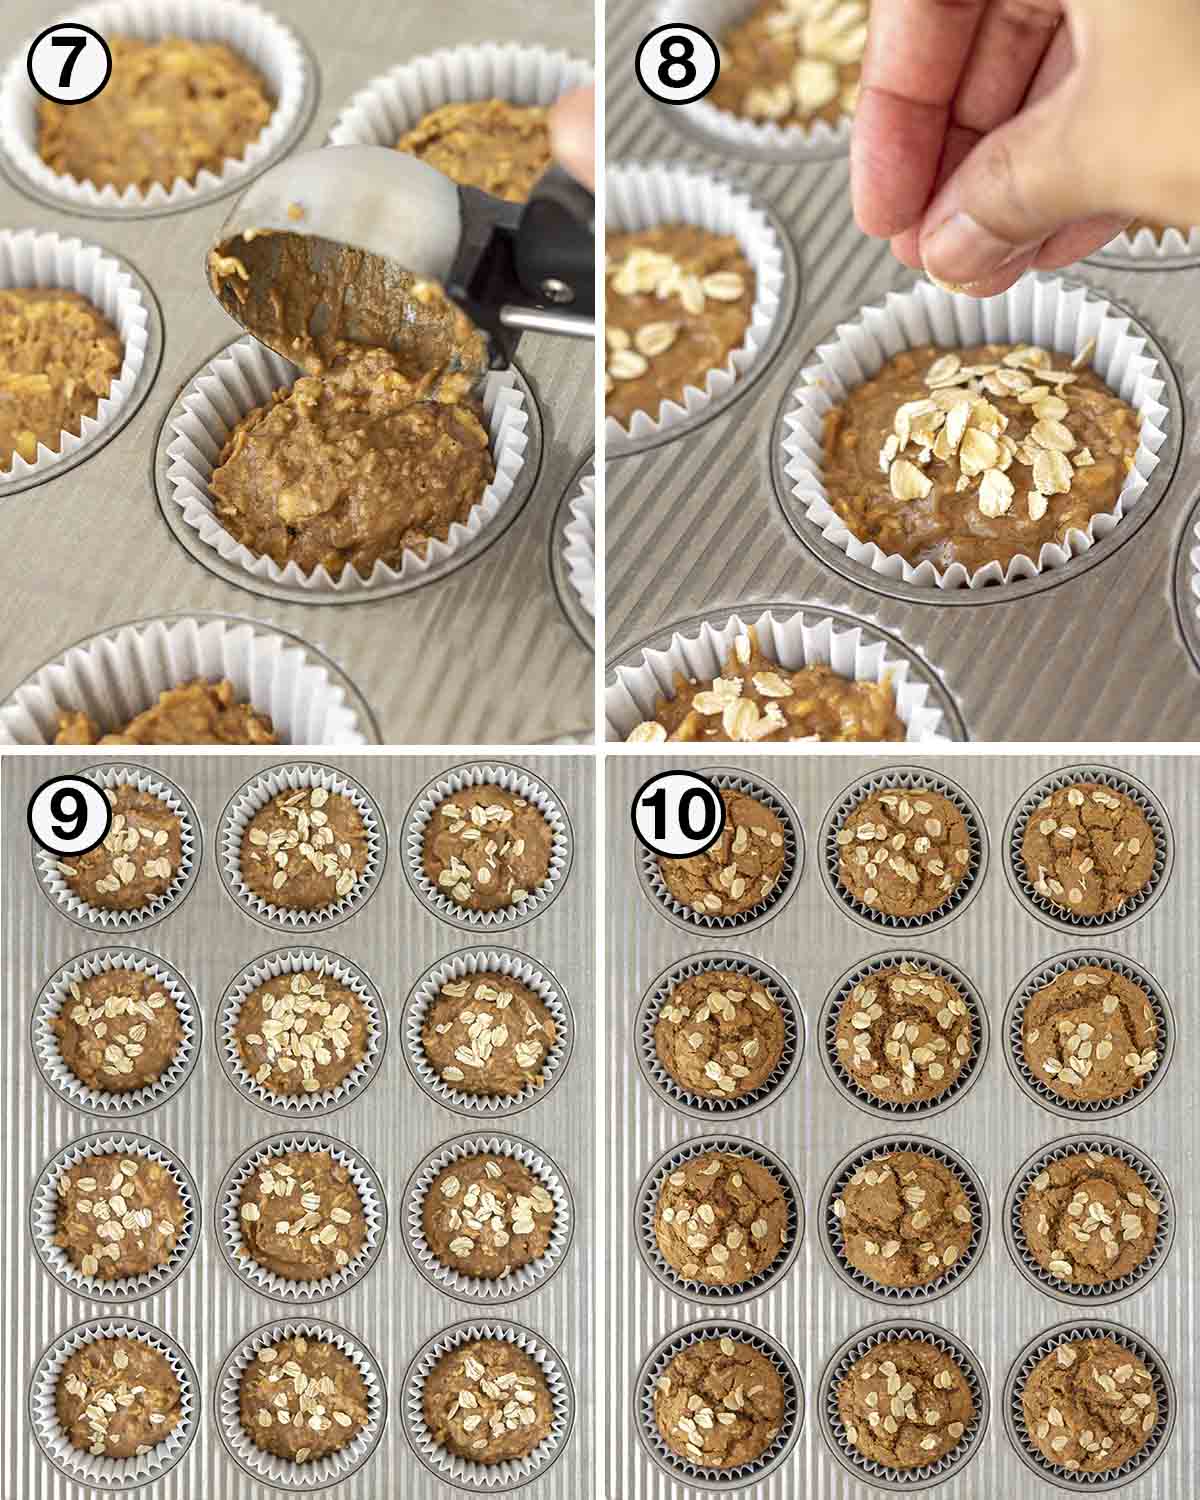 A collage of four images showing the third sequence of steps needed to make gluten-free dairy-free oatmeal muffins.